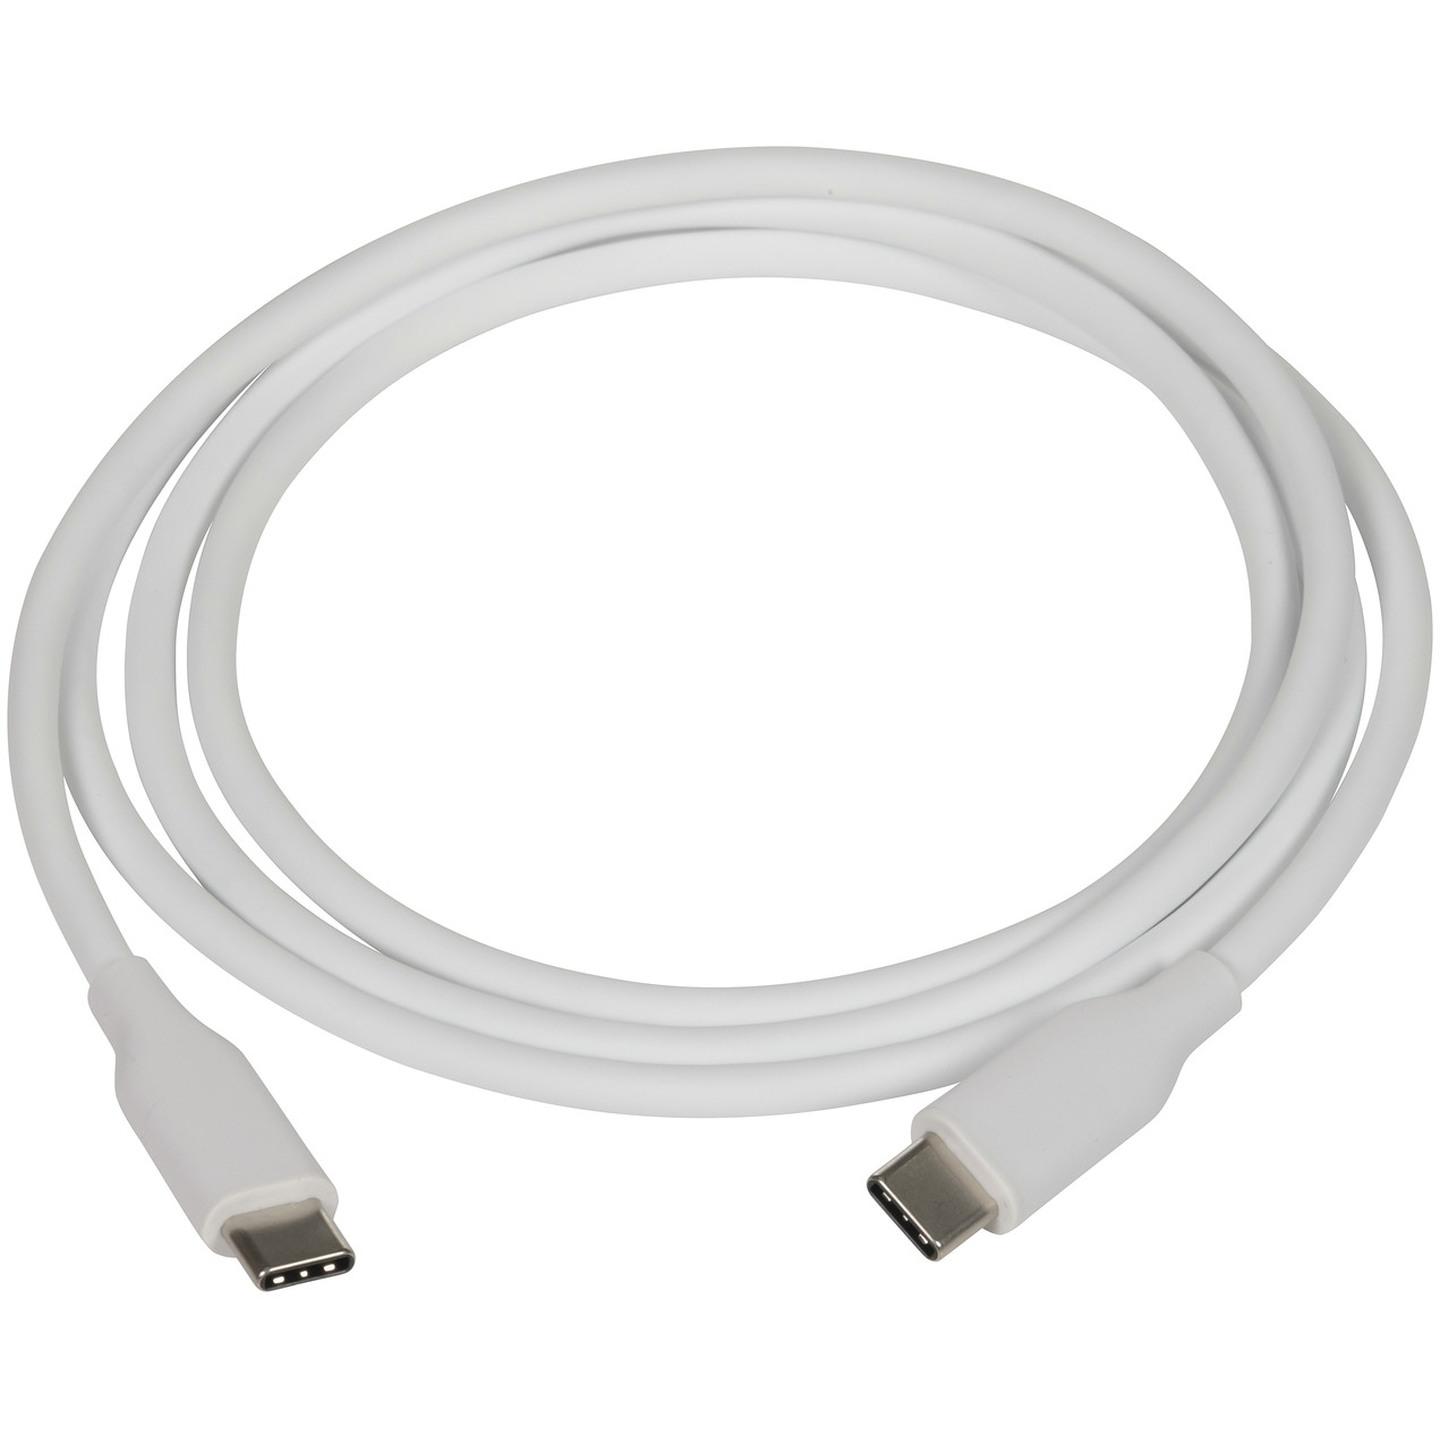 White Silicone USB Type-C to USB Type-C Cable 1.2m